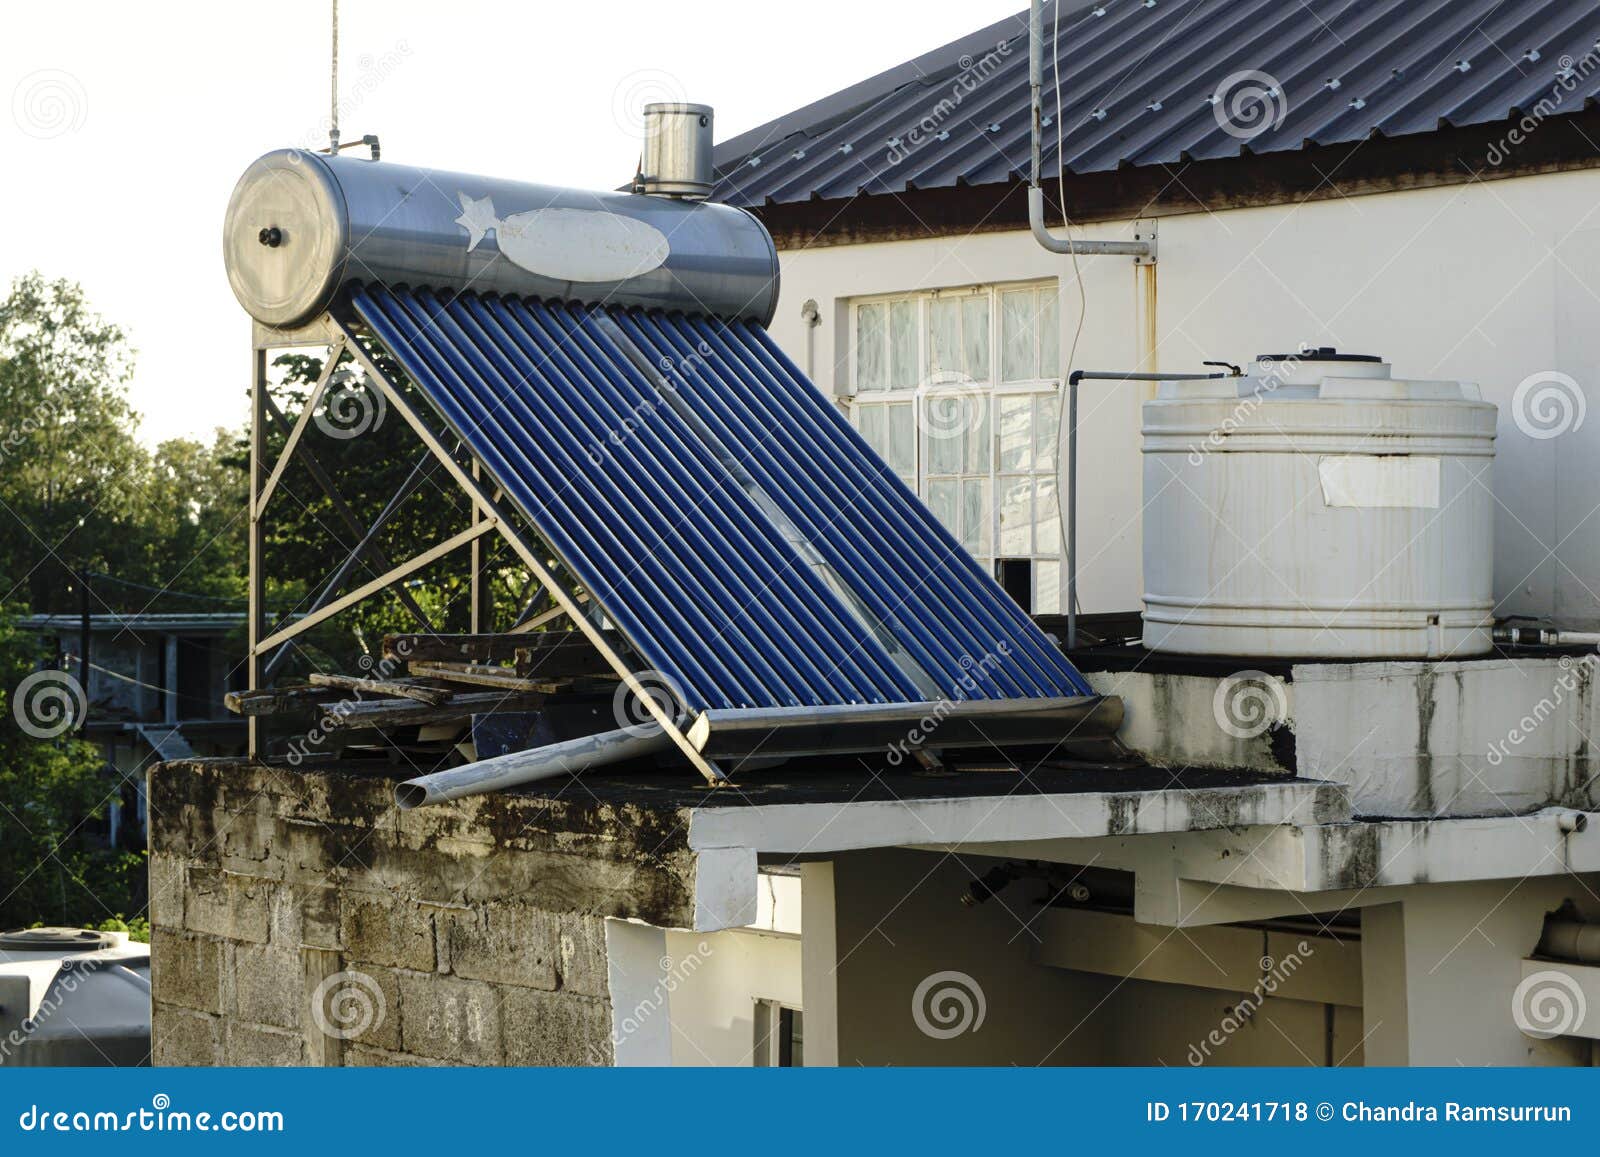 Solar Panel And Water Cistern Editorial Stock Photo Image of alternative, energy 170241718